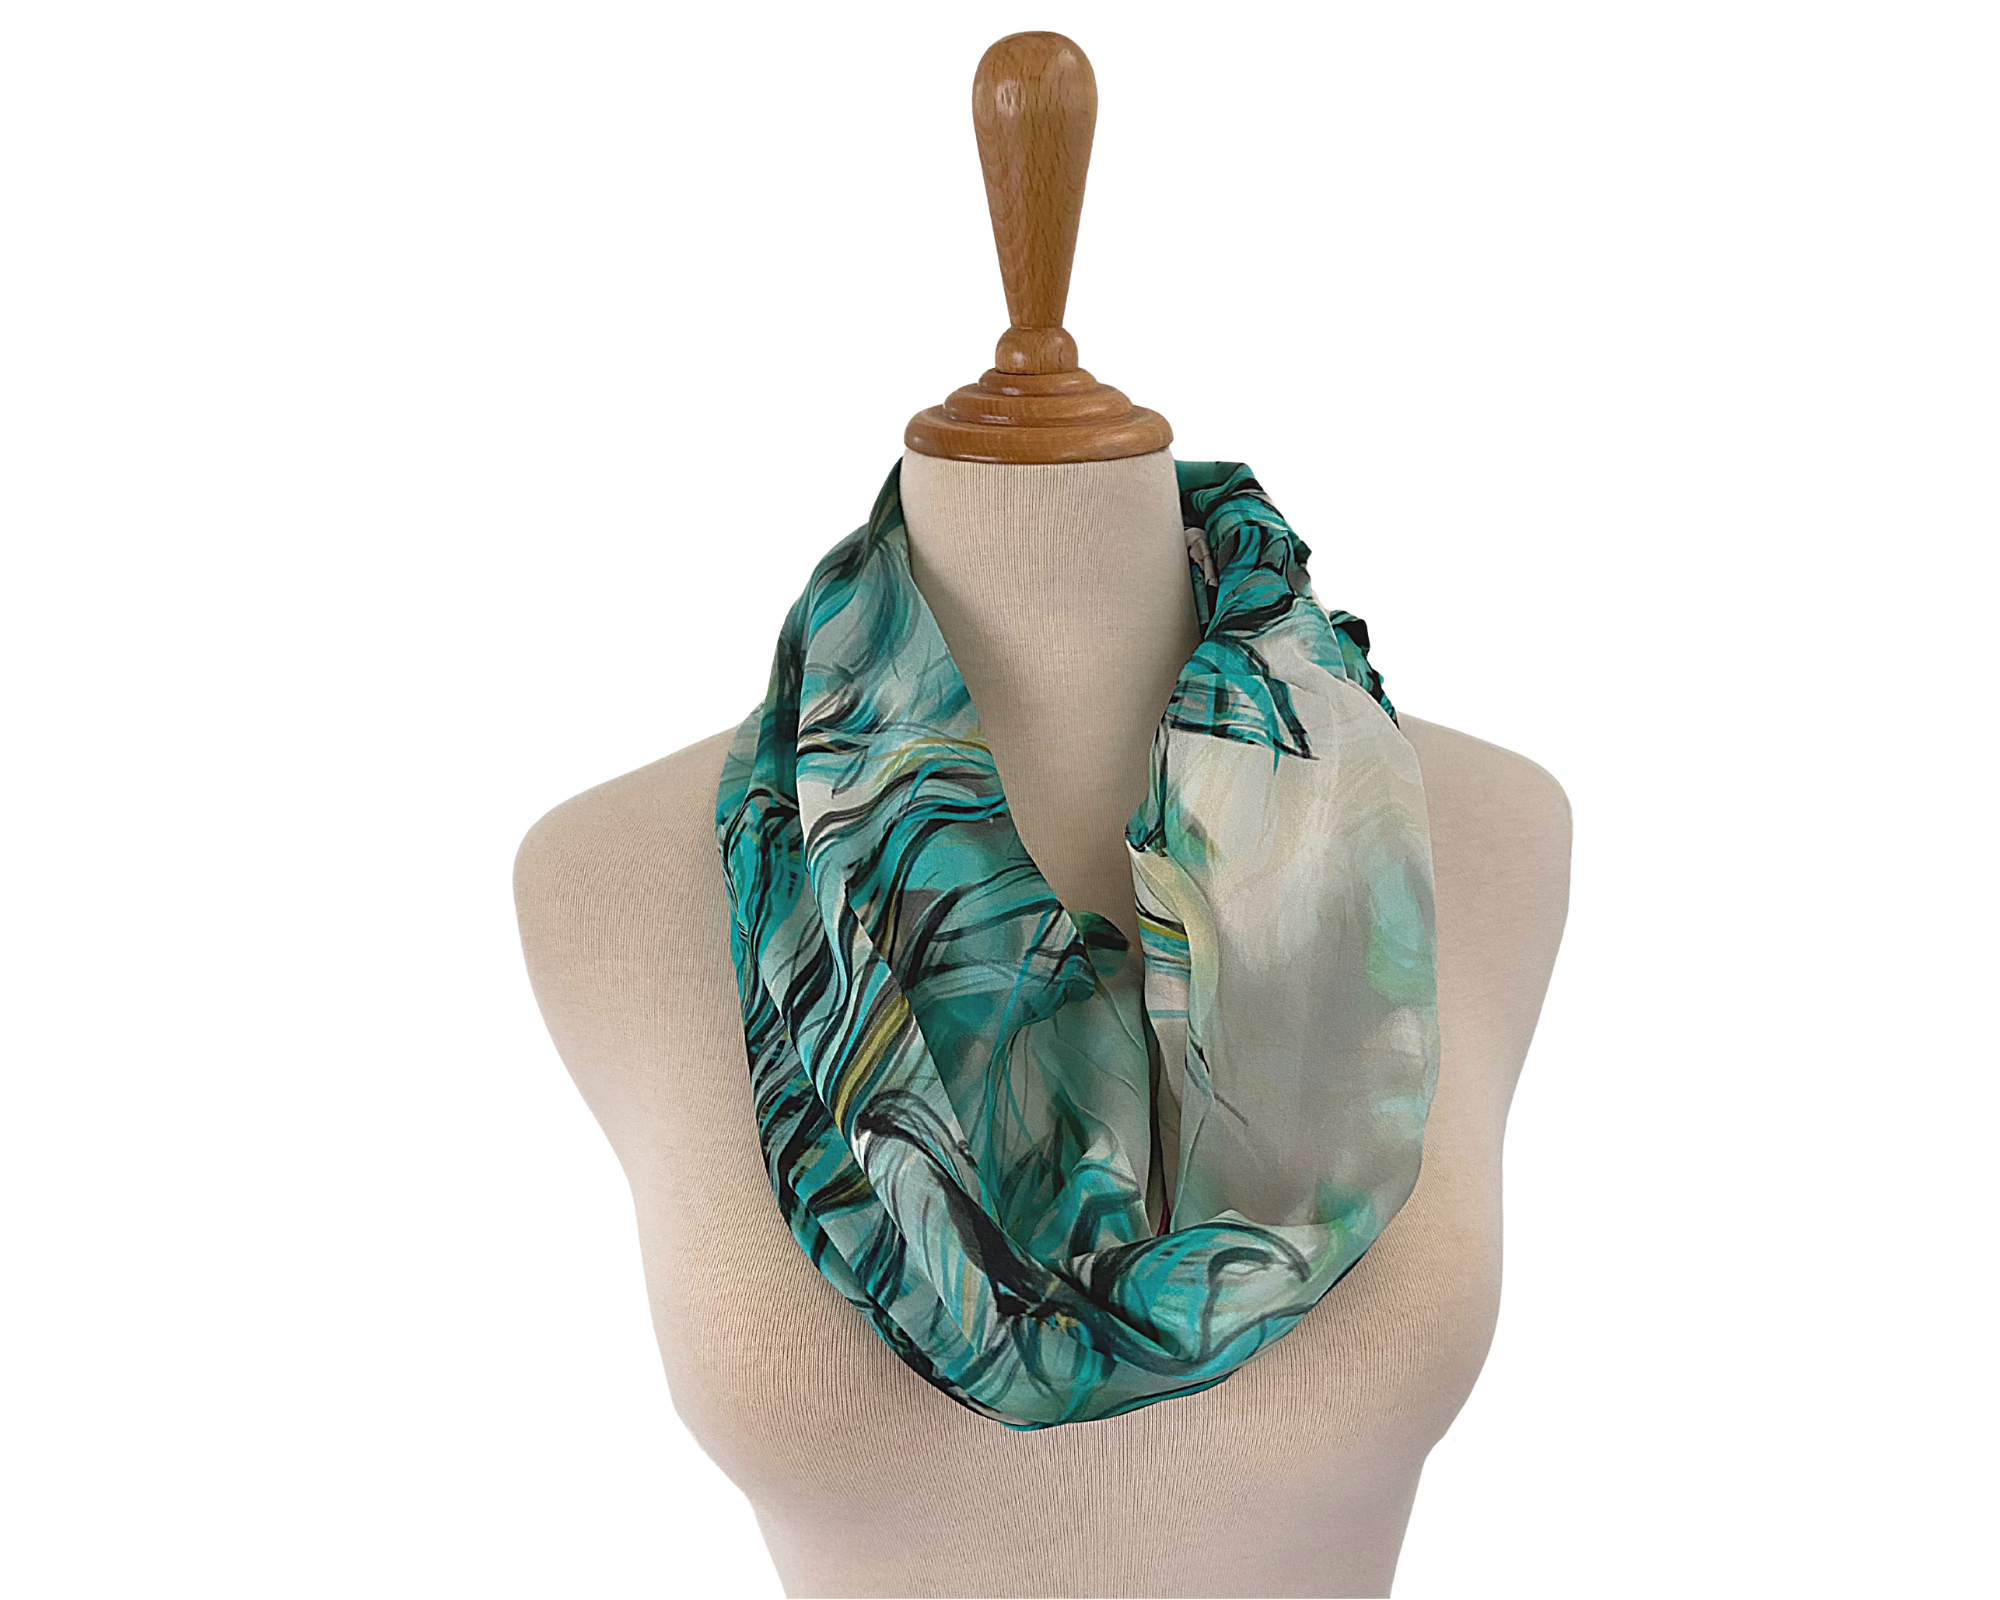 Handmade Red-Teal Floral Infinity Scarf